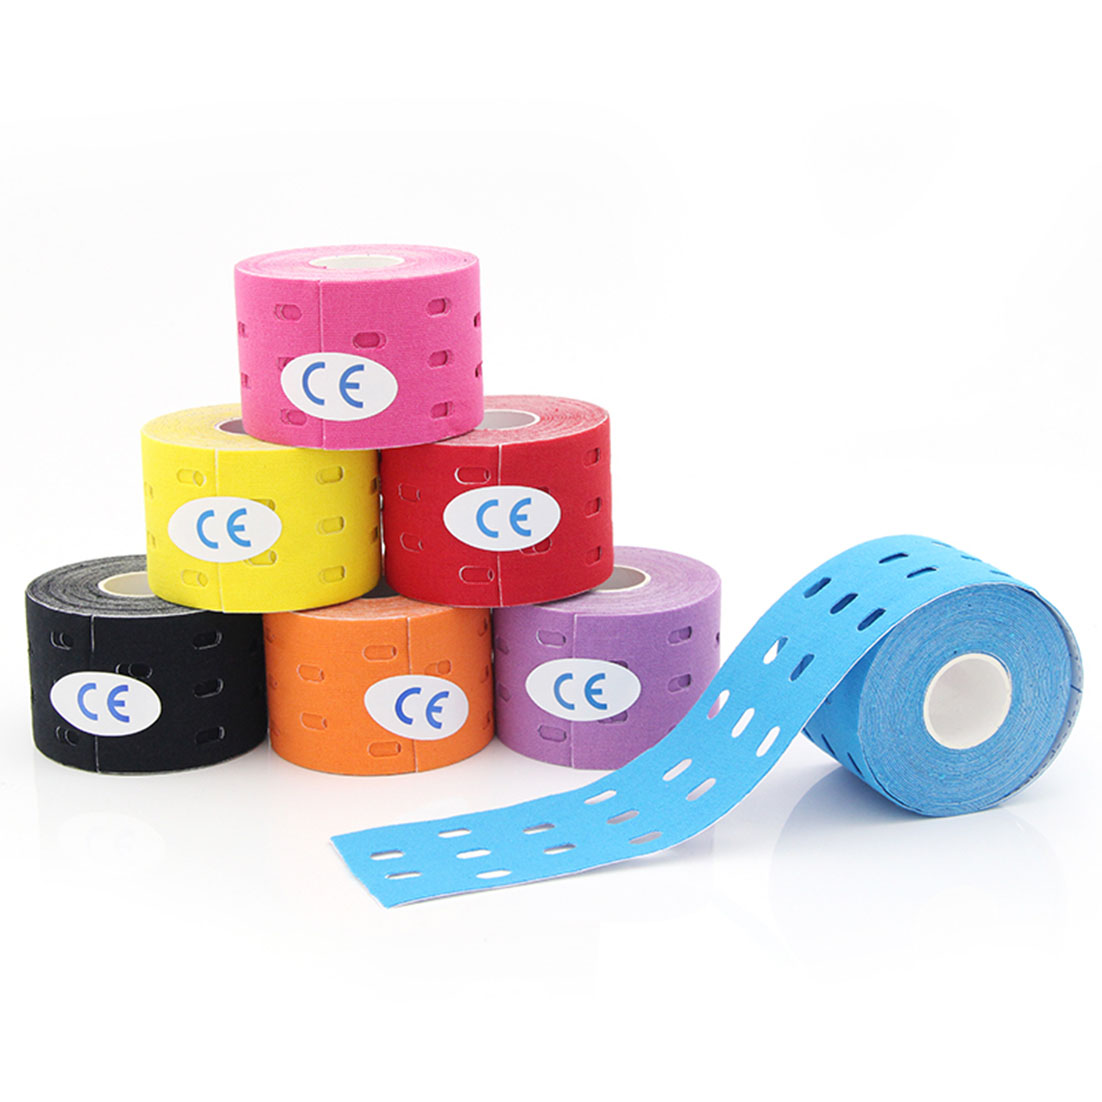 Punched Kinesiology Tape